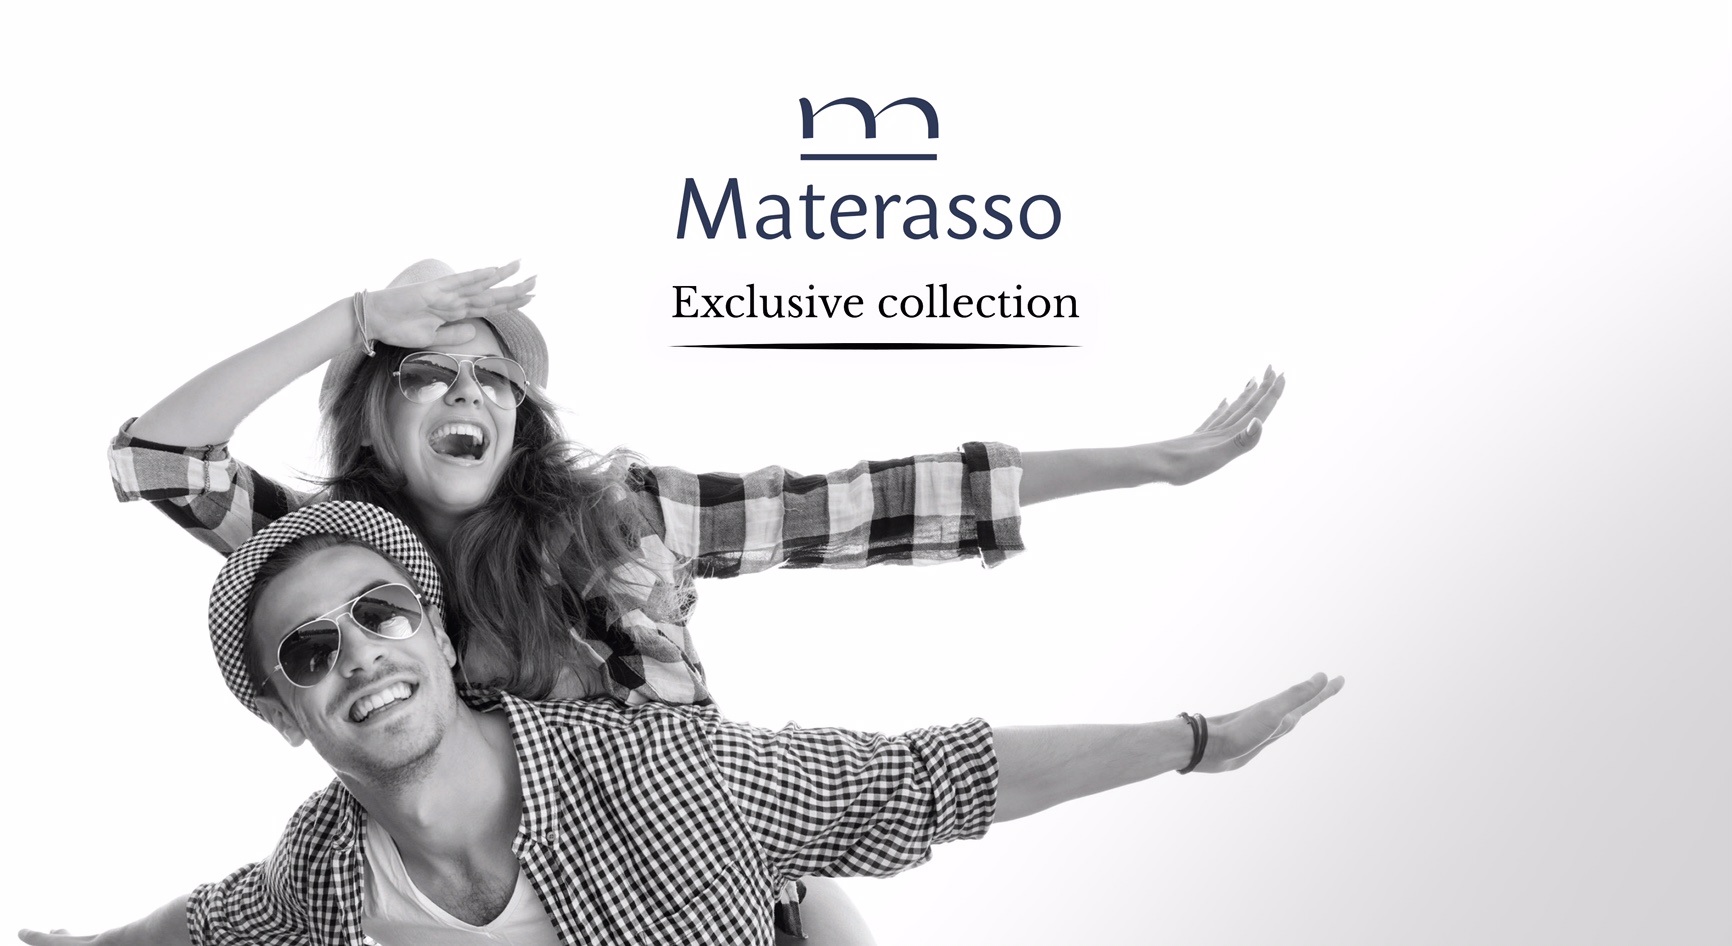 Materasso exclusive collection